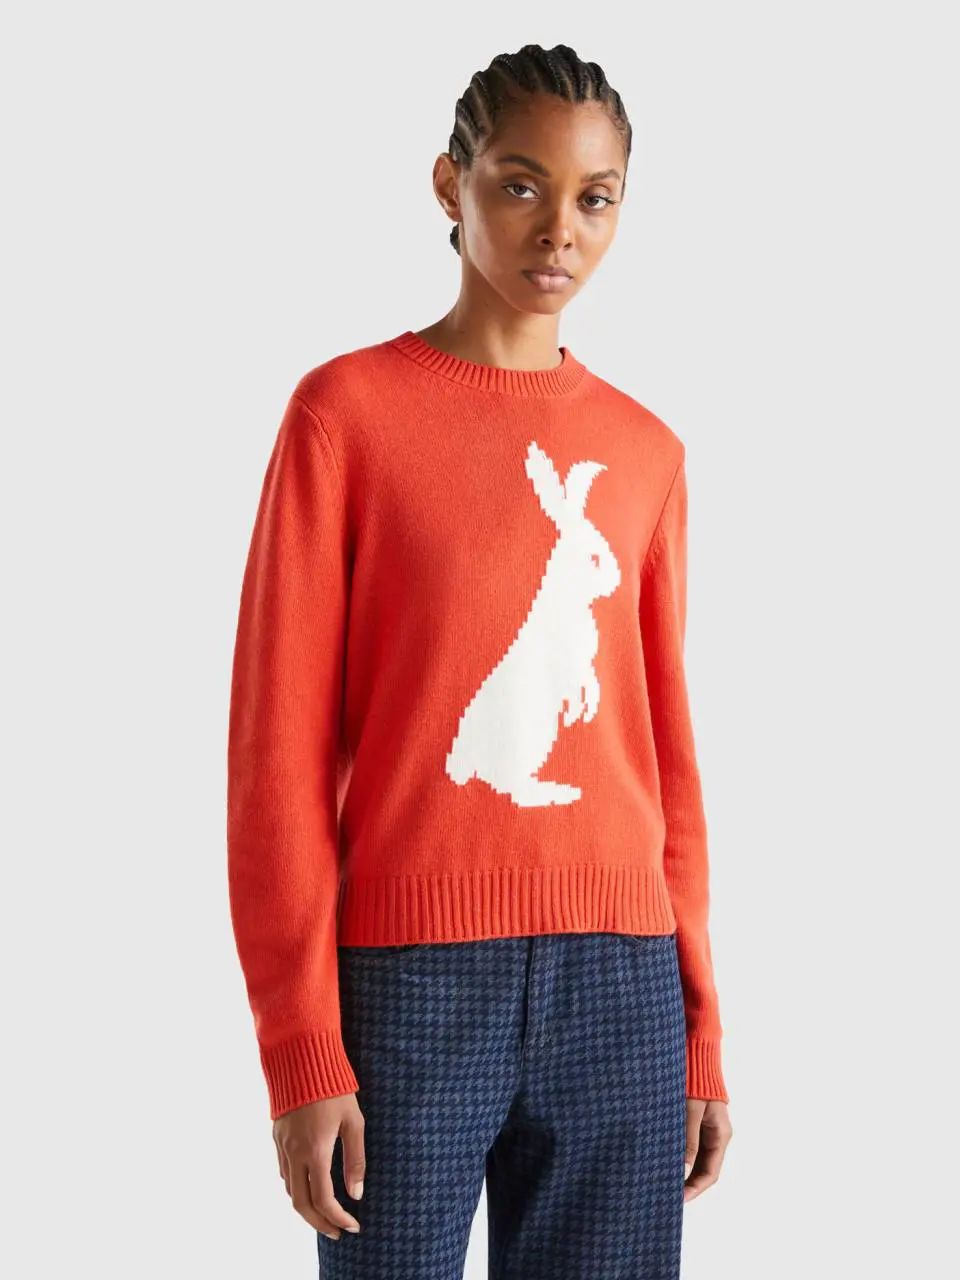 Benetton sweater with bunny inlay. 1